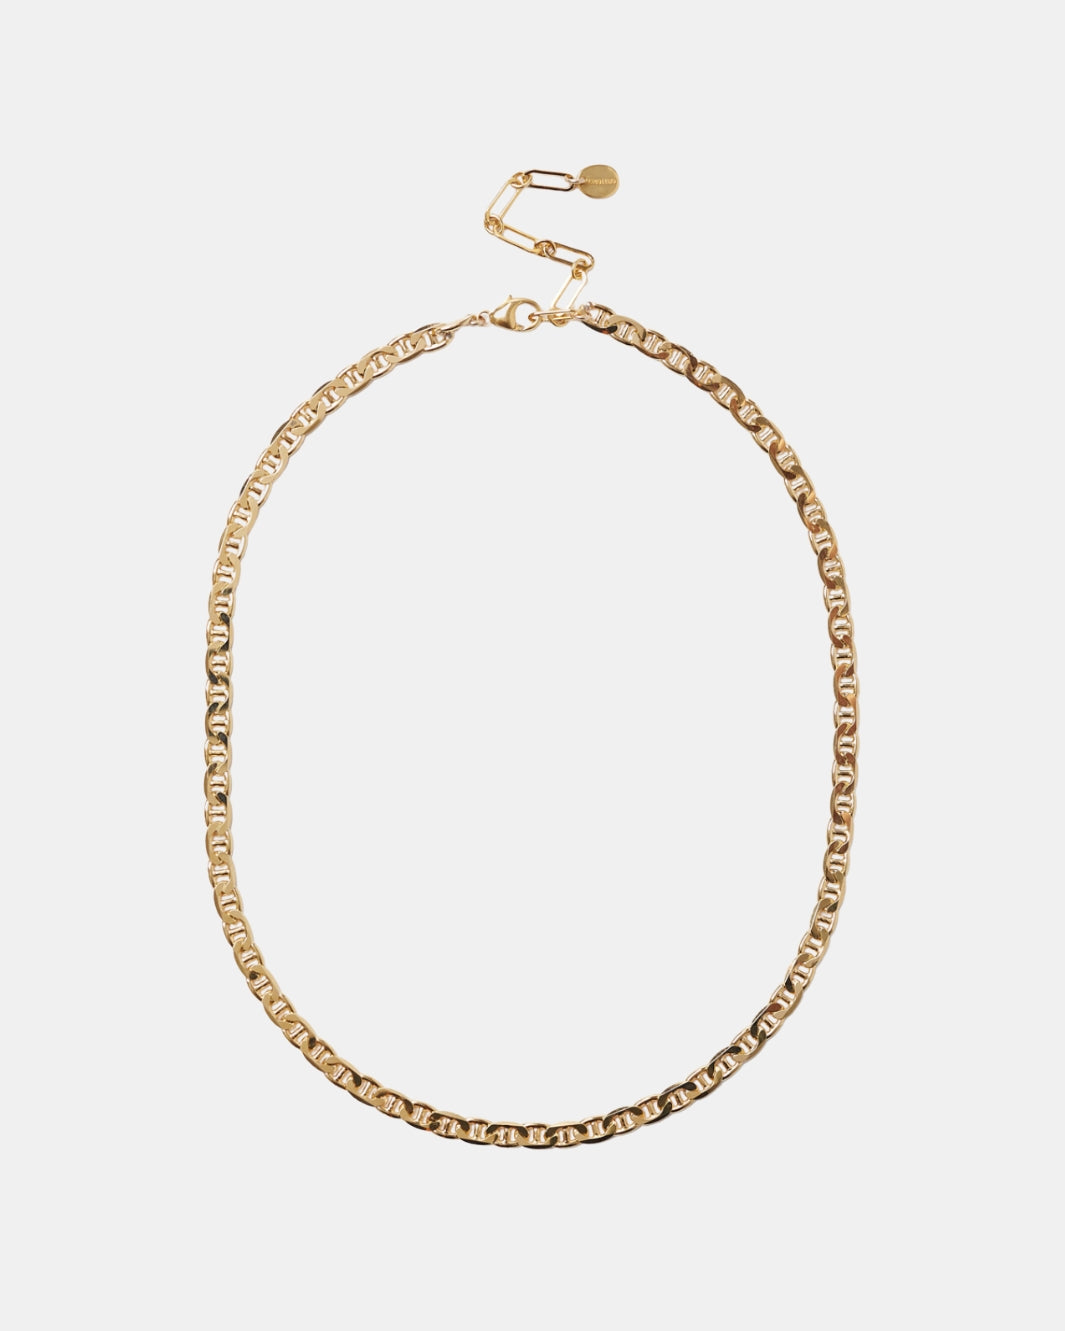 MEDIUM CHAIN LINK NECKLACE IN YELLOW GOLD - Romi Boutique